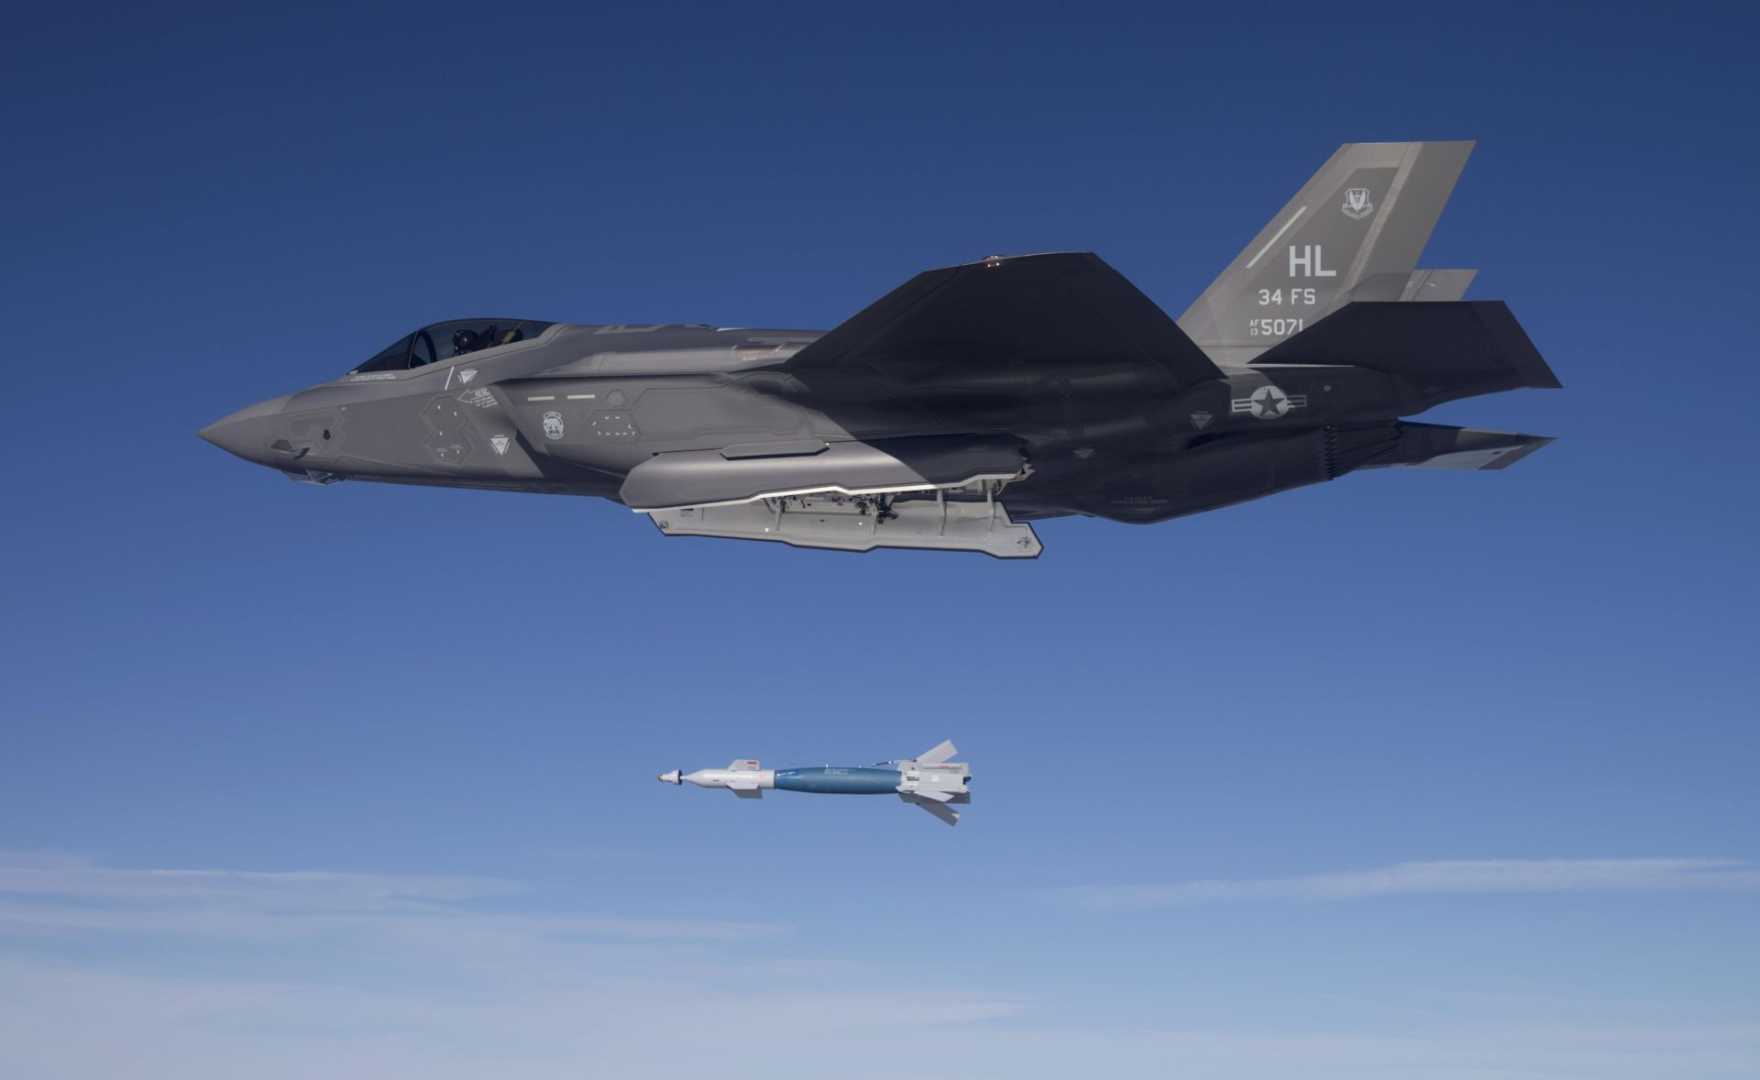 GBU-12 laser-guided bomb from an F-35A